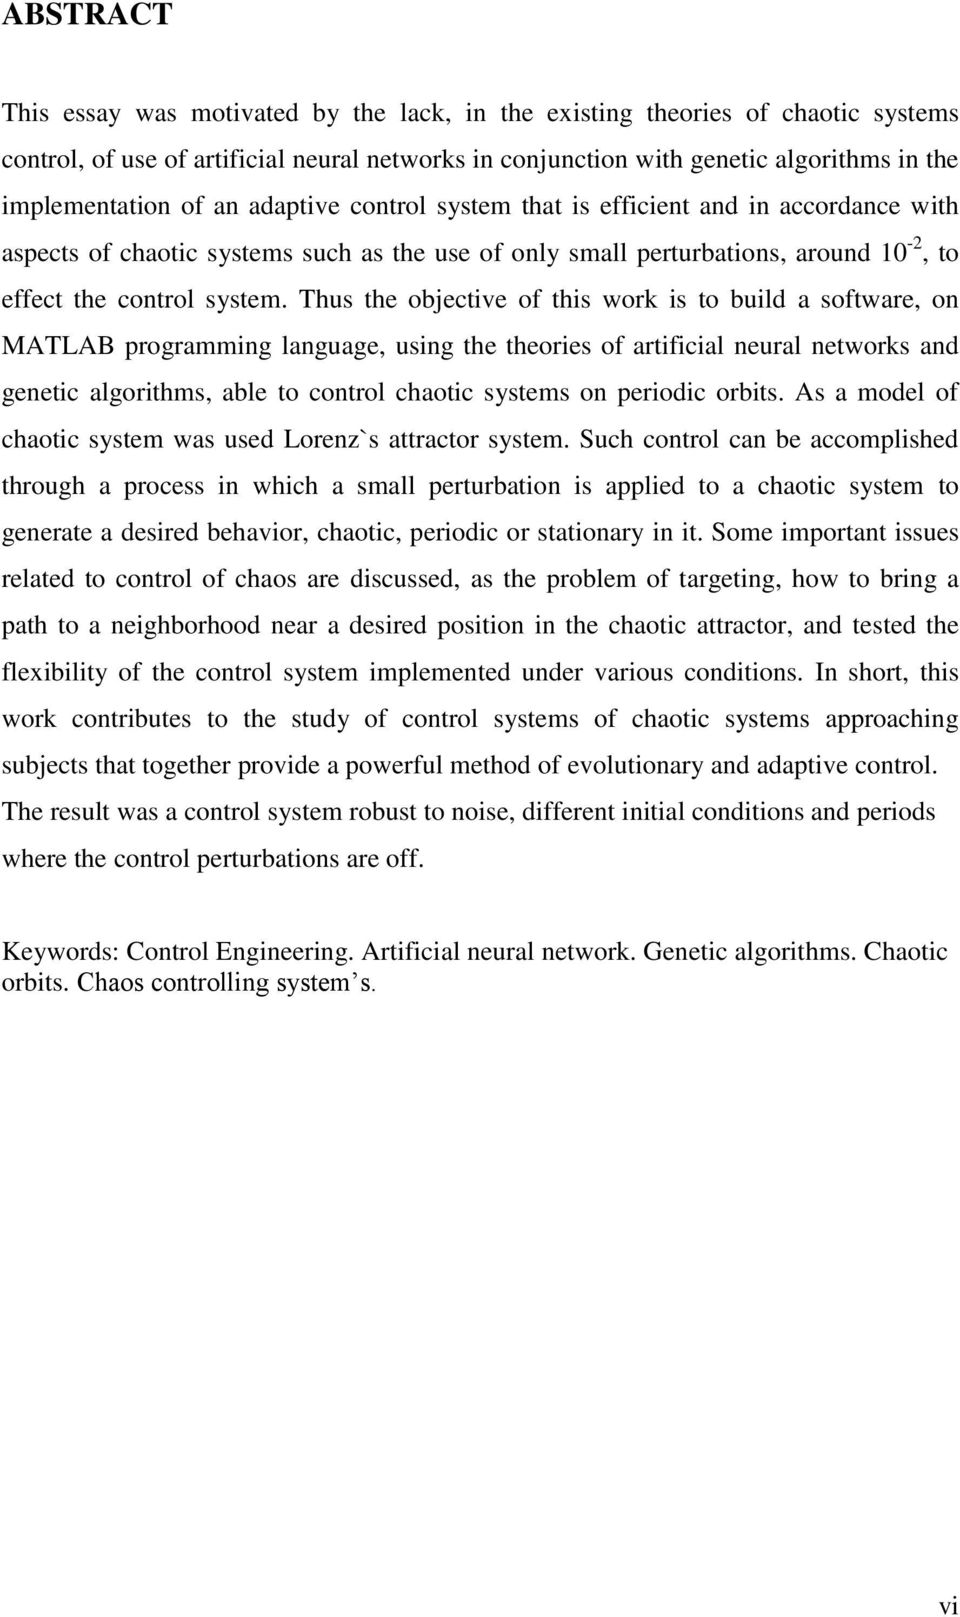 Thus the objective of this work is to build a software, on MATLAB programming language, using the theories of artificial neural networks and genetic algorithms, able to control chaotic systems on